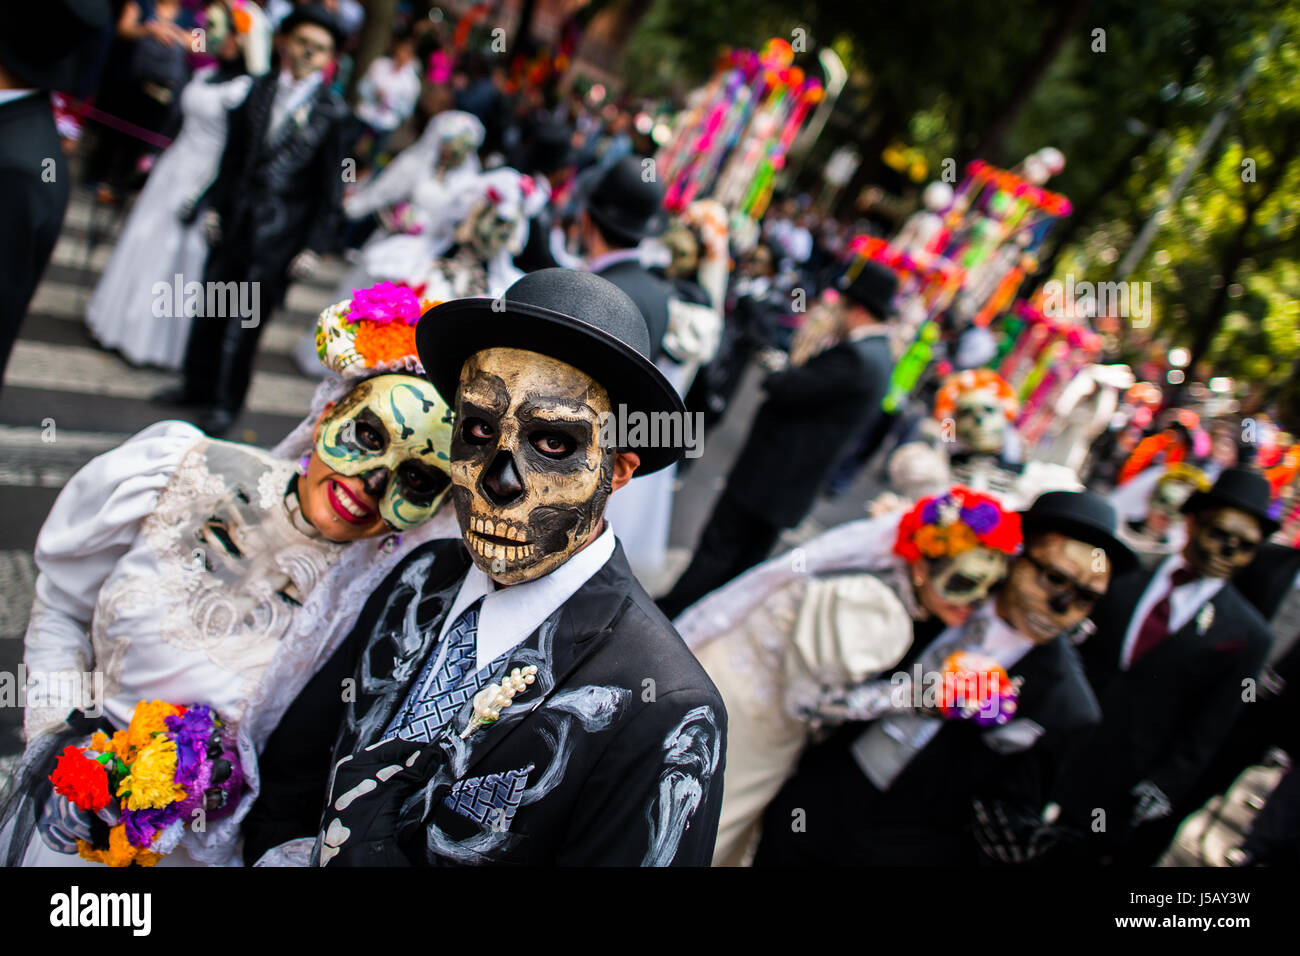 Young couples, costumed as La Catrina, walk through the town during the Day of the Dead festivities in Mexico City, Mexico. Stock Photo